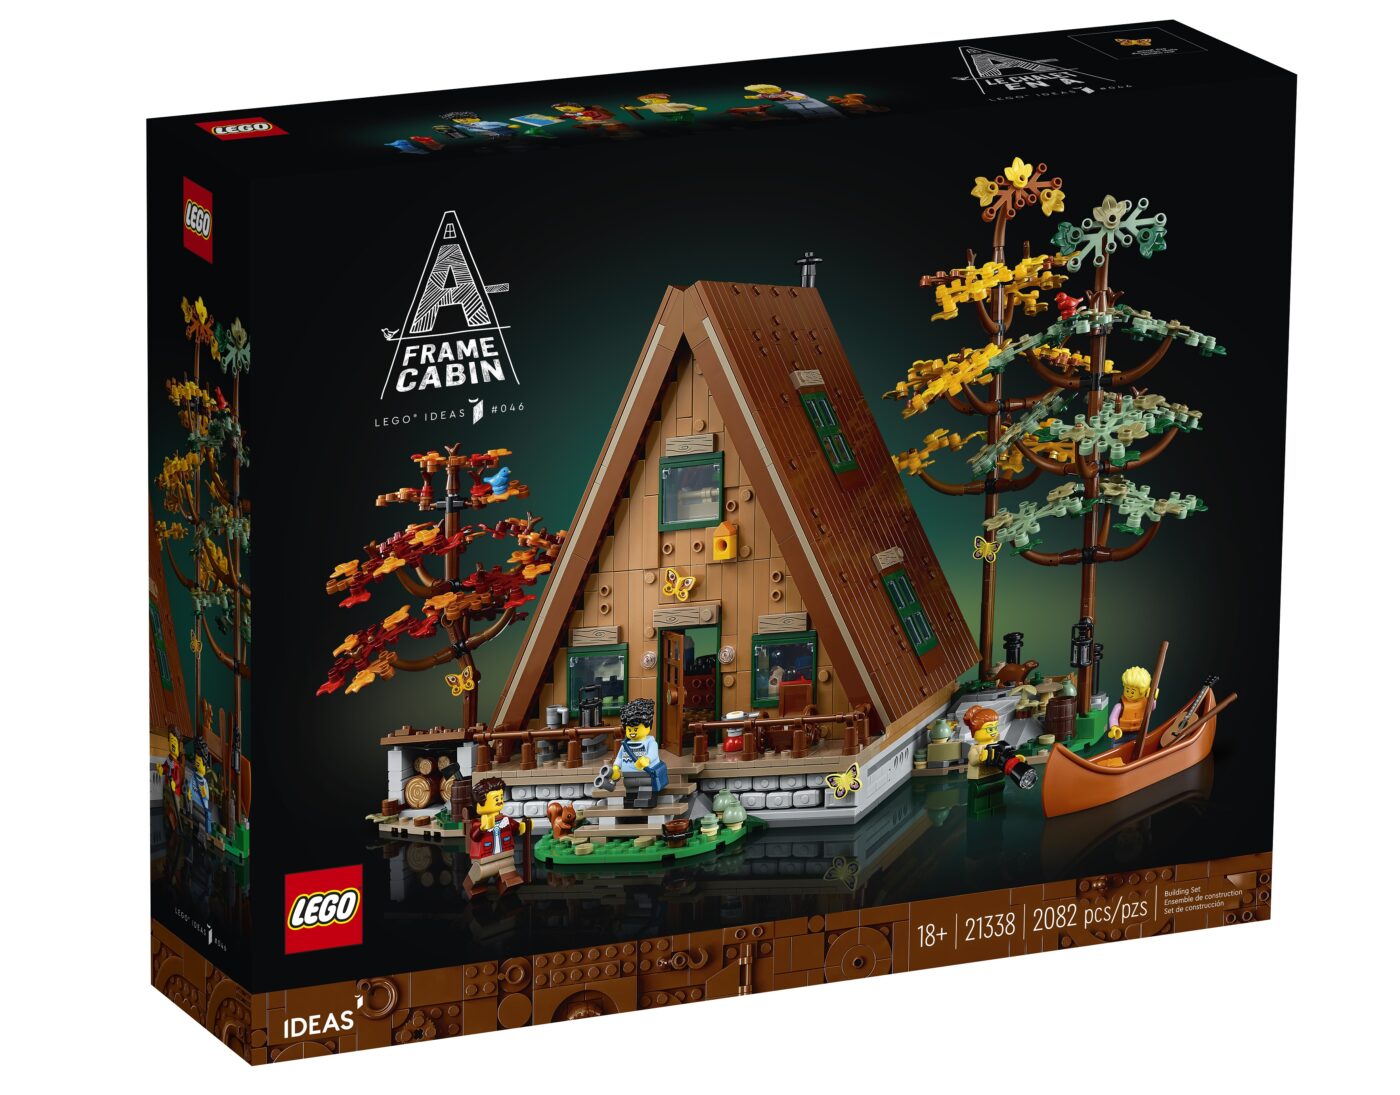 The LEGO Ideas 21338 A-Frame Cabin is a gorgeous set that places